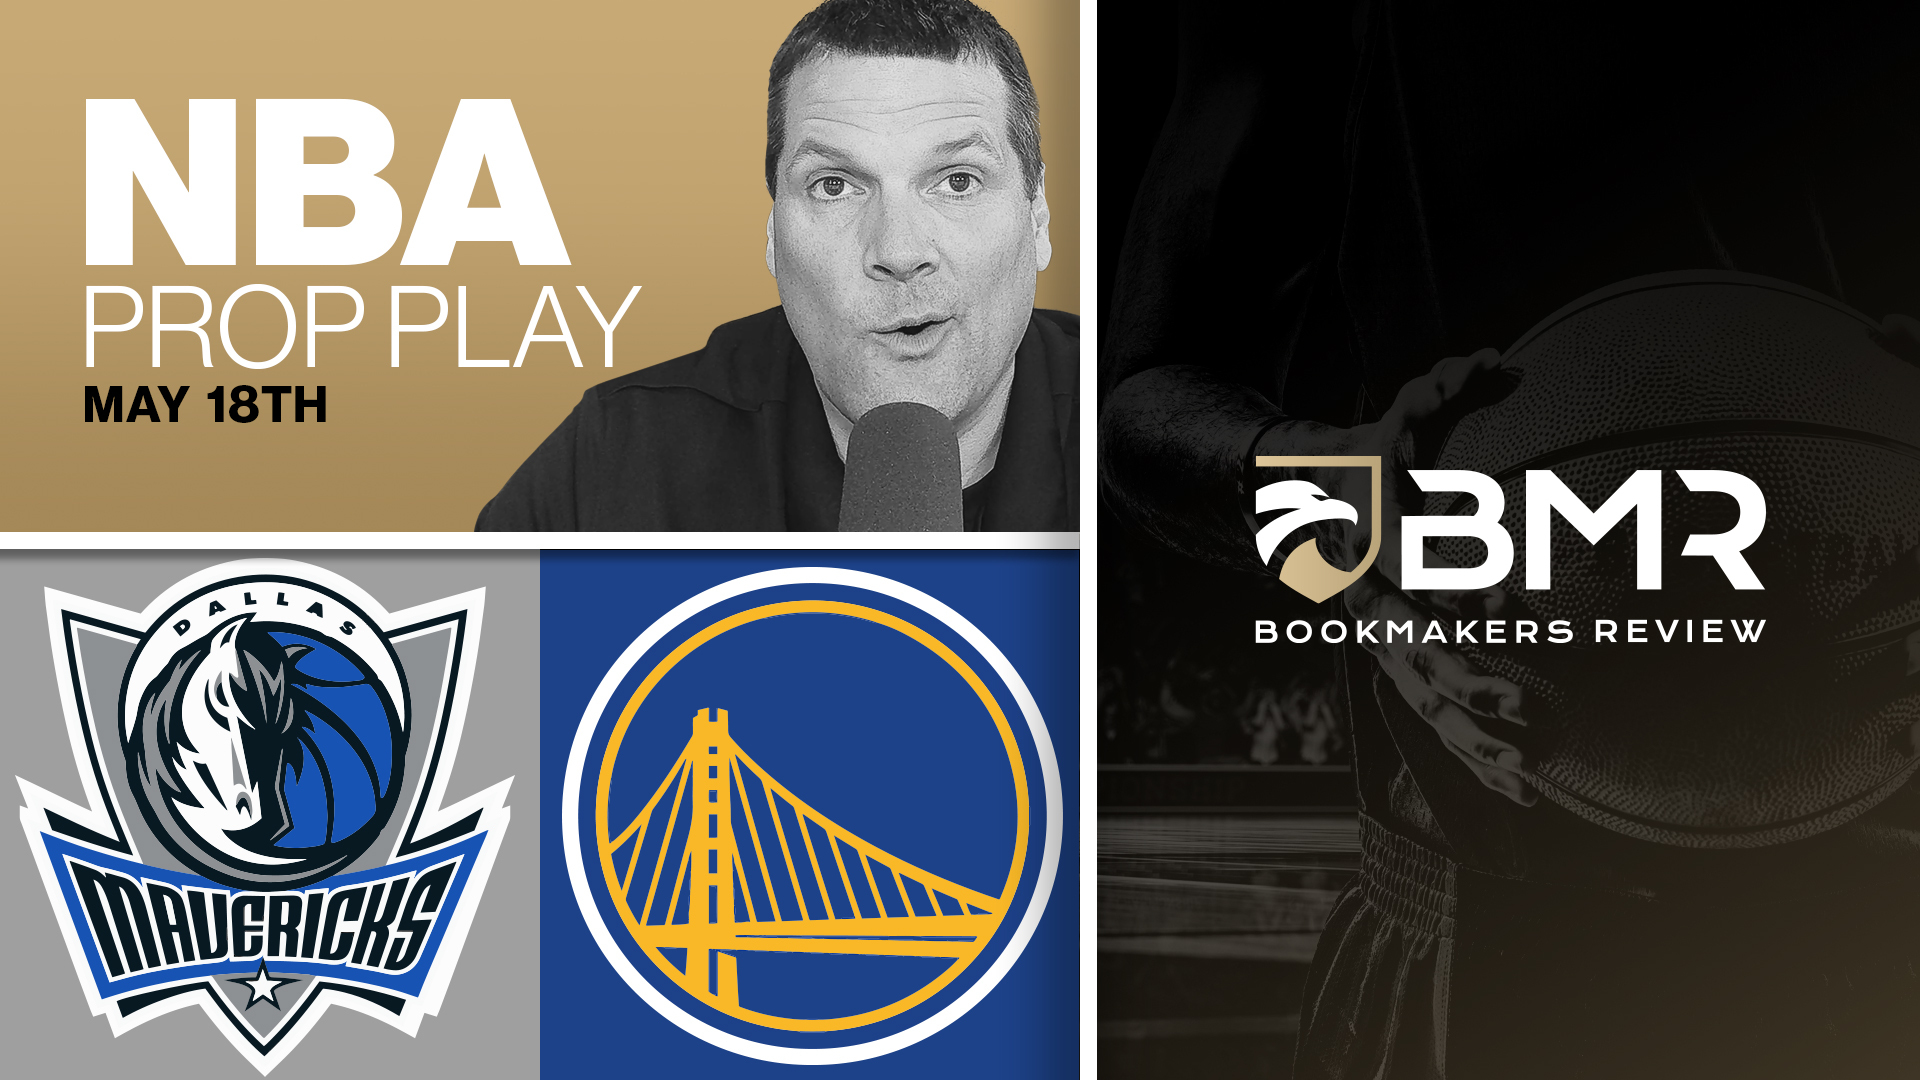 Mavericks vs. Warriors | Free NBA Playoffs Player Prop Pick by Donnie RightSide - May 18th